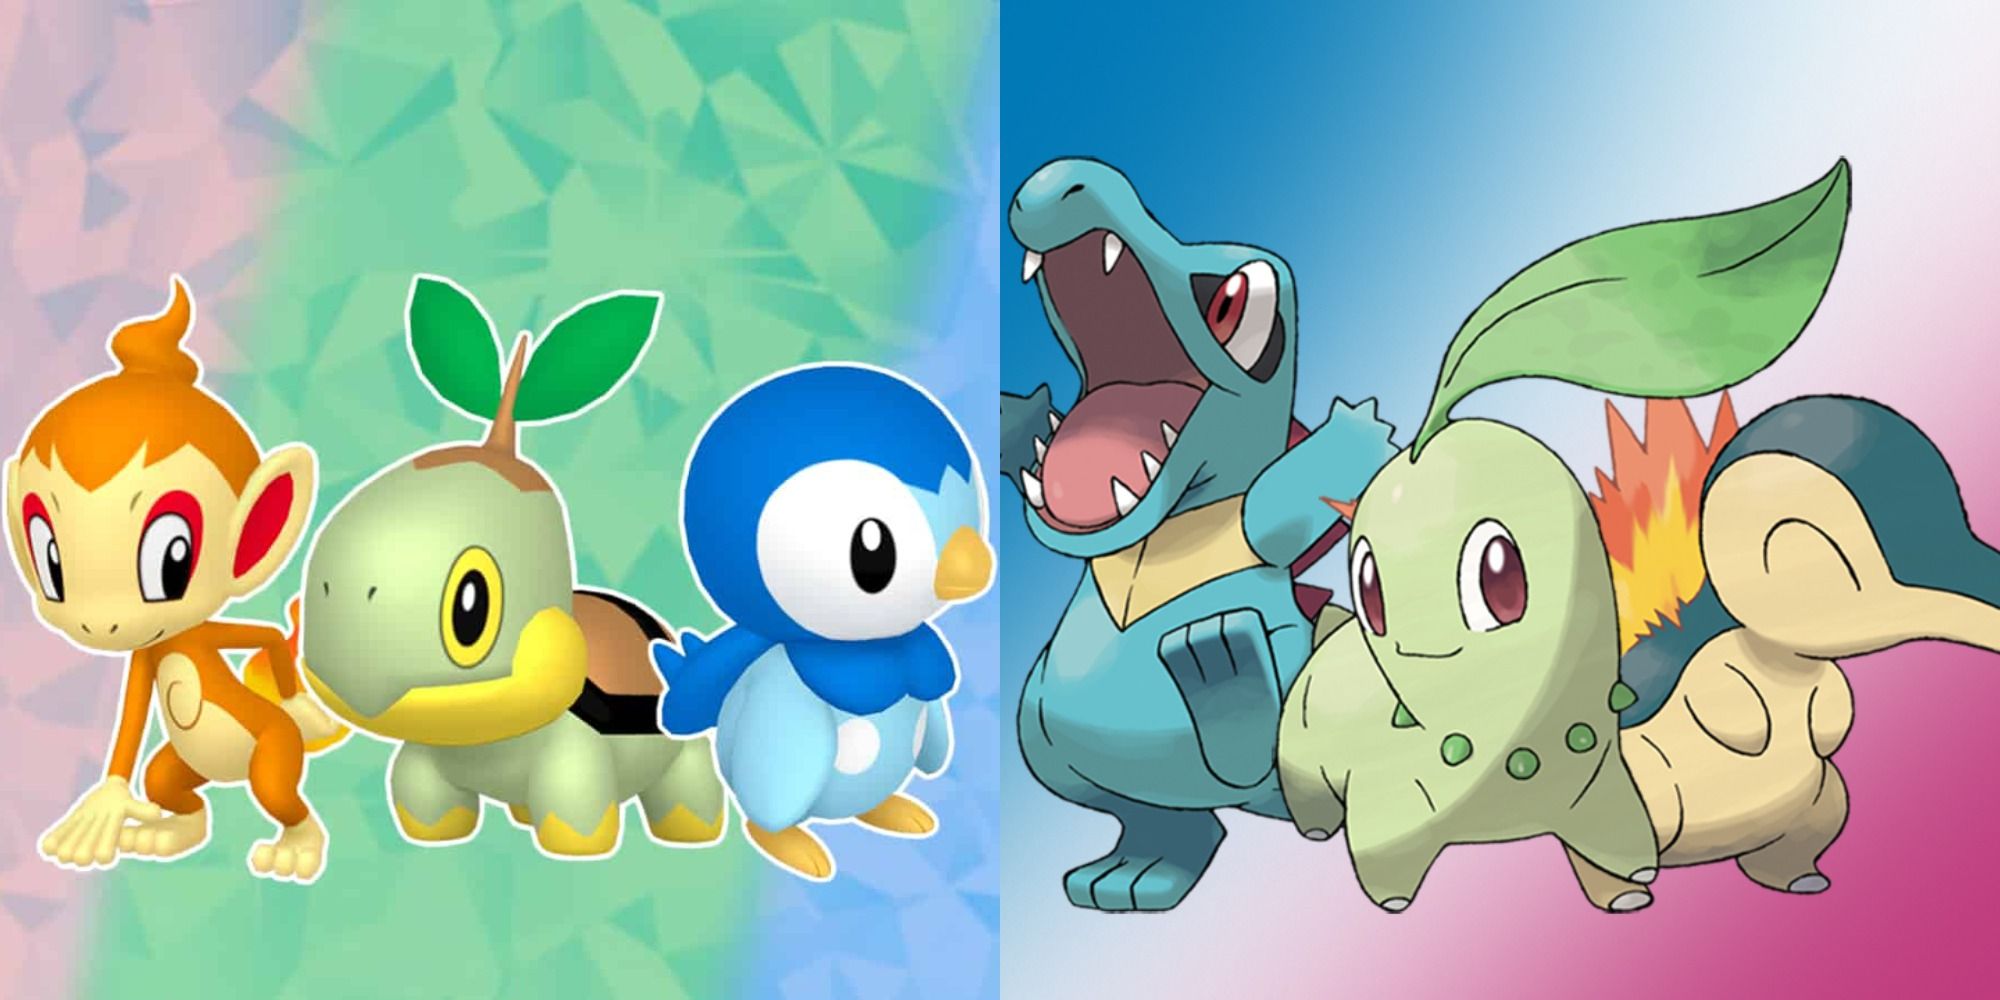 Pokemon starters ranked, from Charmander to Turtwig